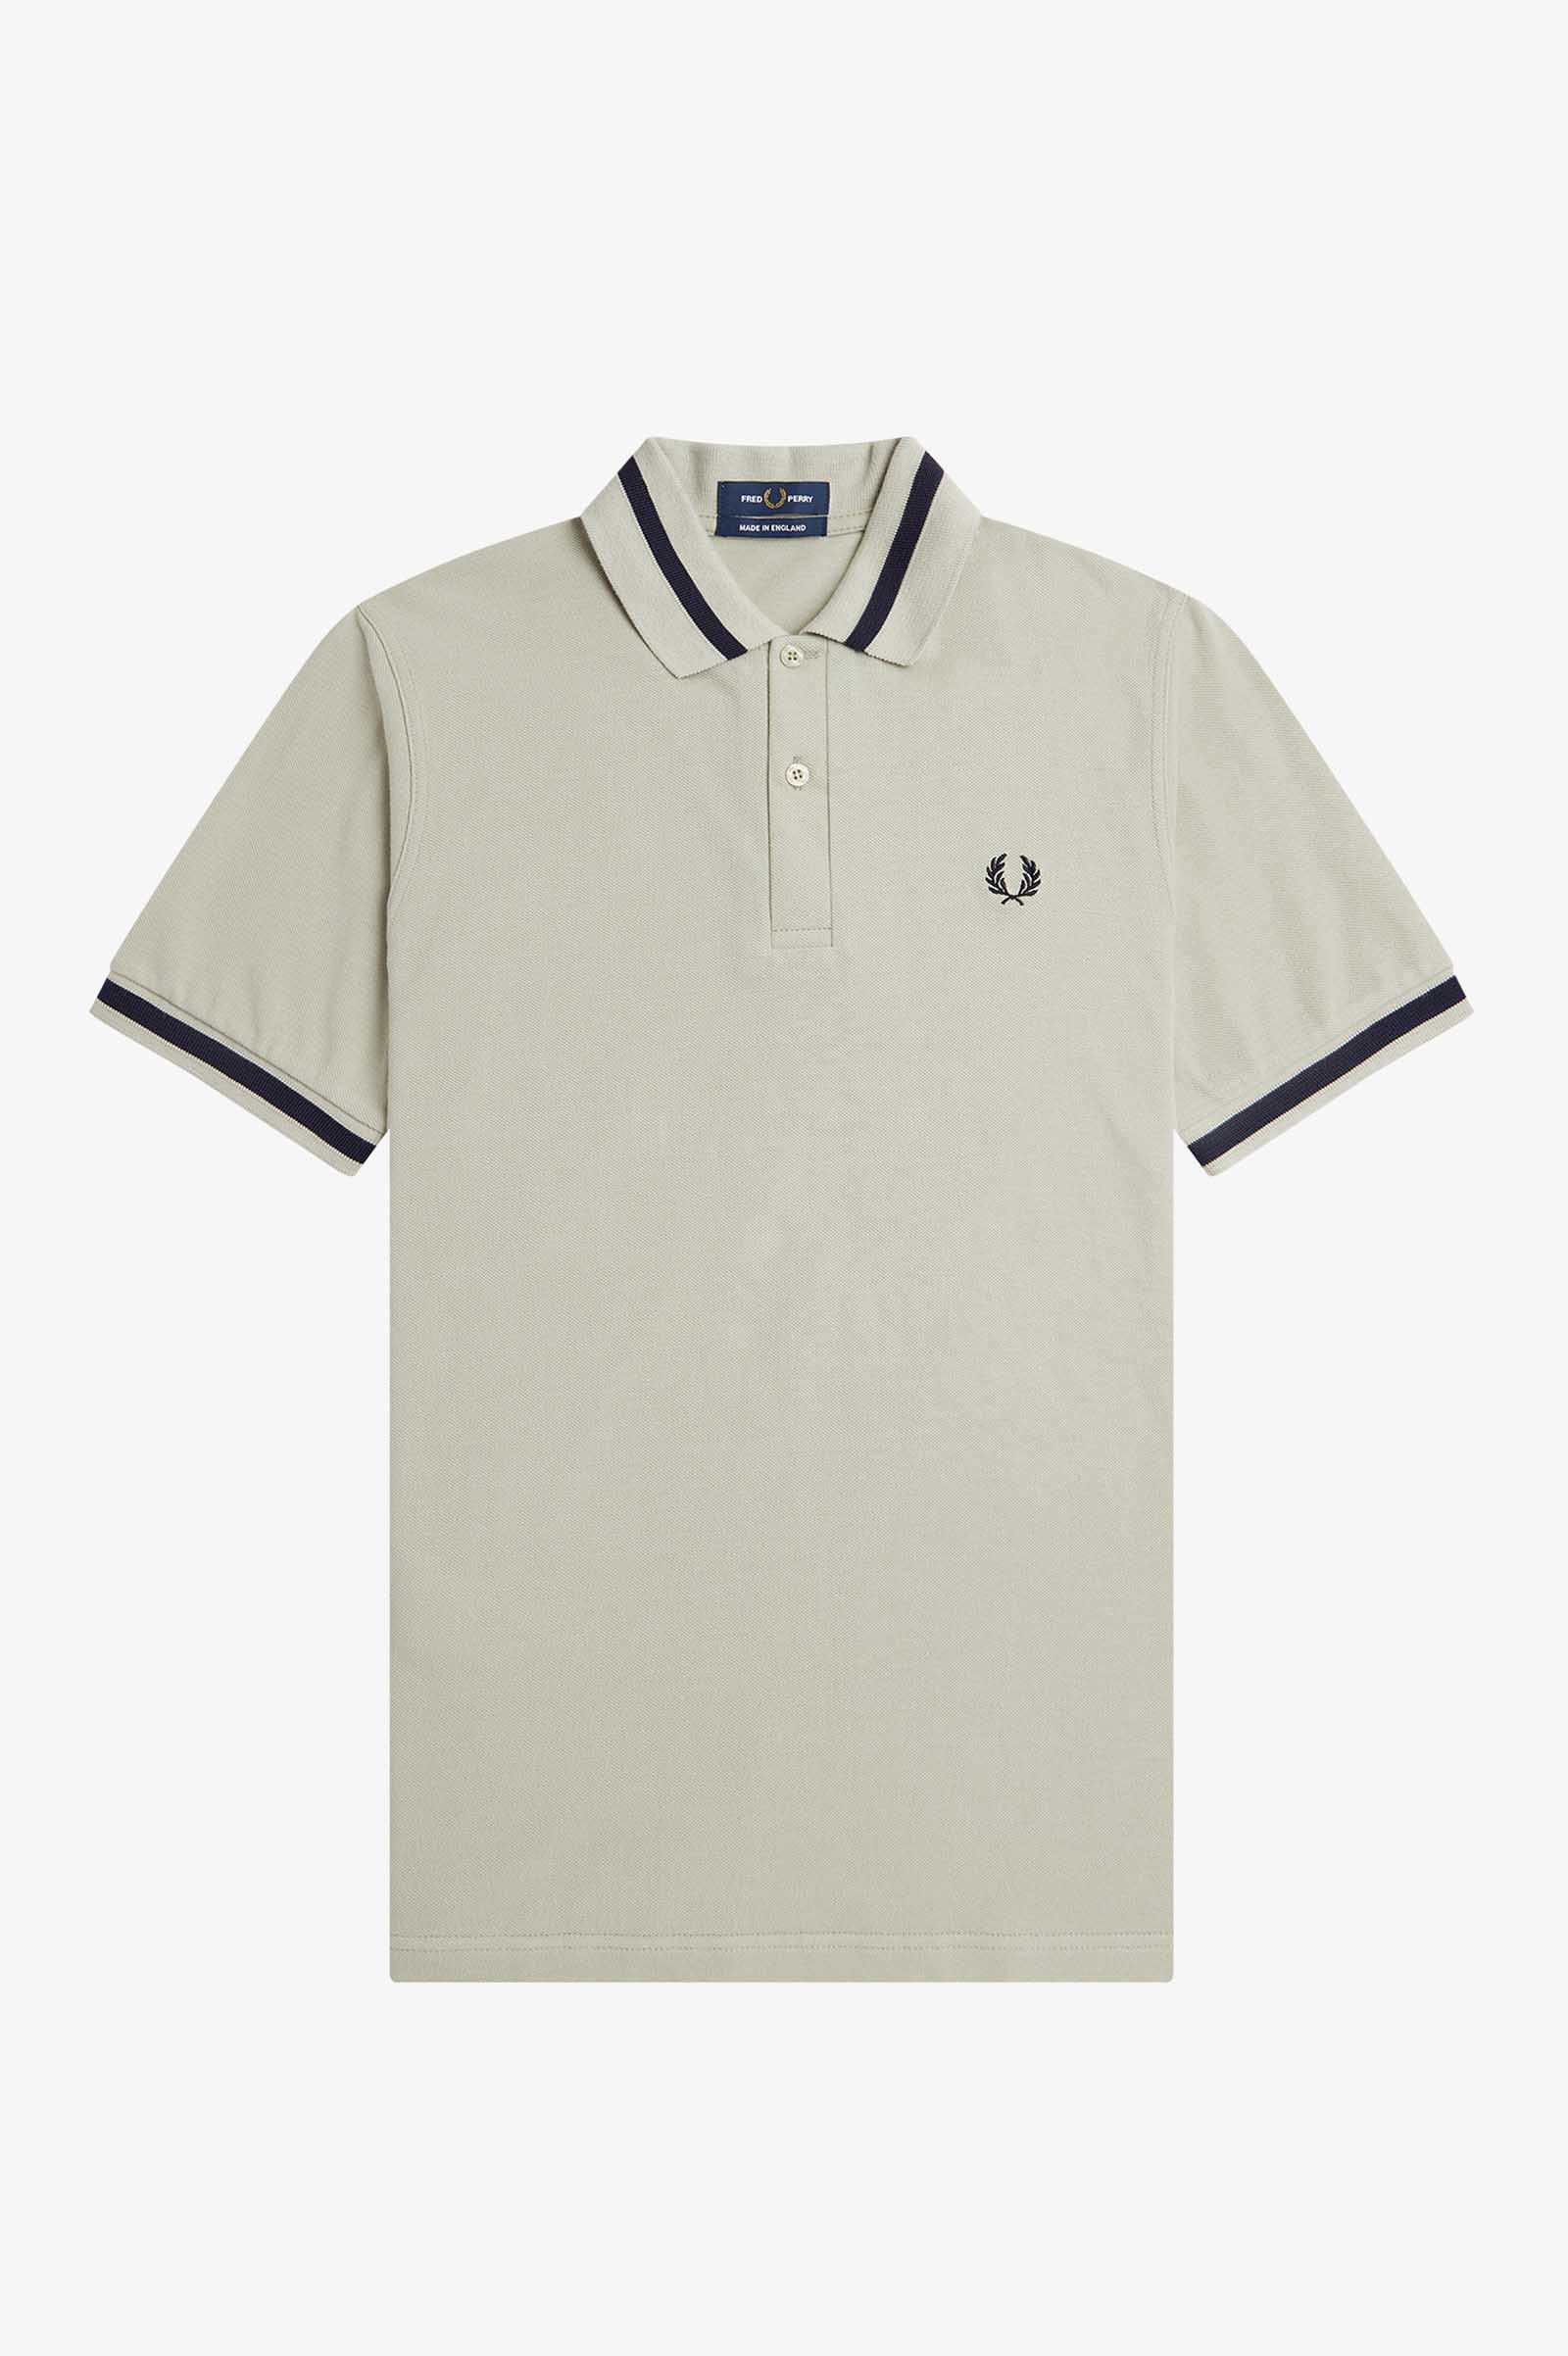 Single Tipped Fred Perry Shirt(38 S57：LIGHT OYSTER / NAVY 